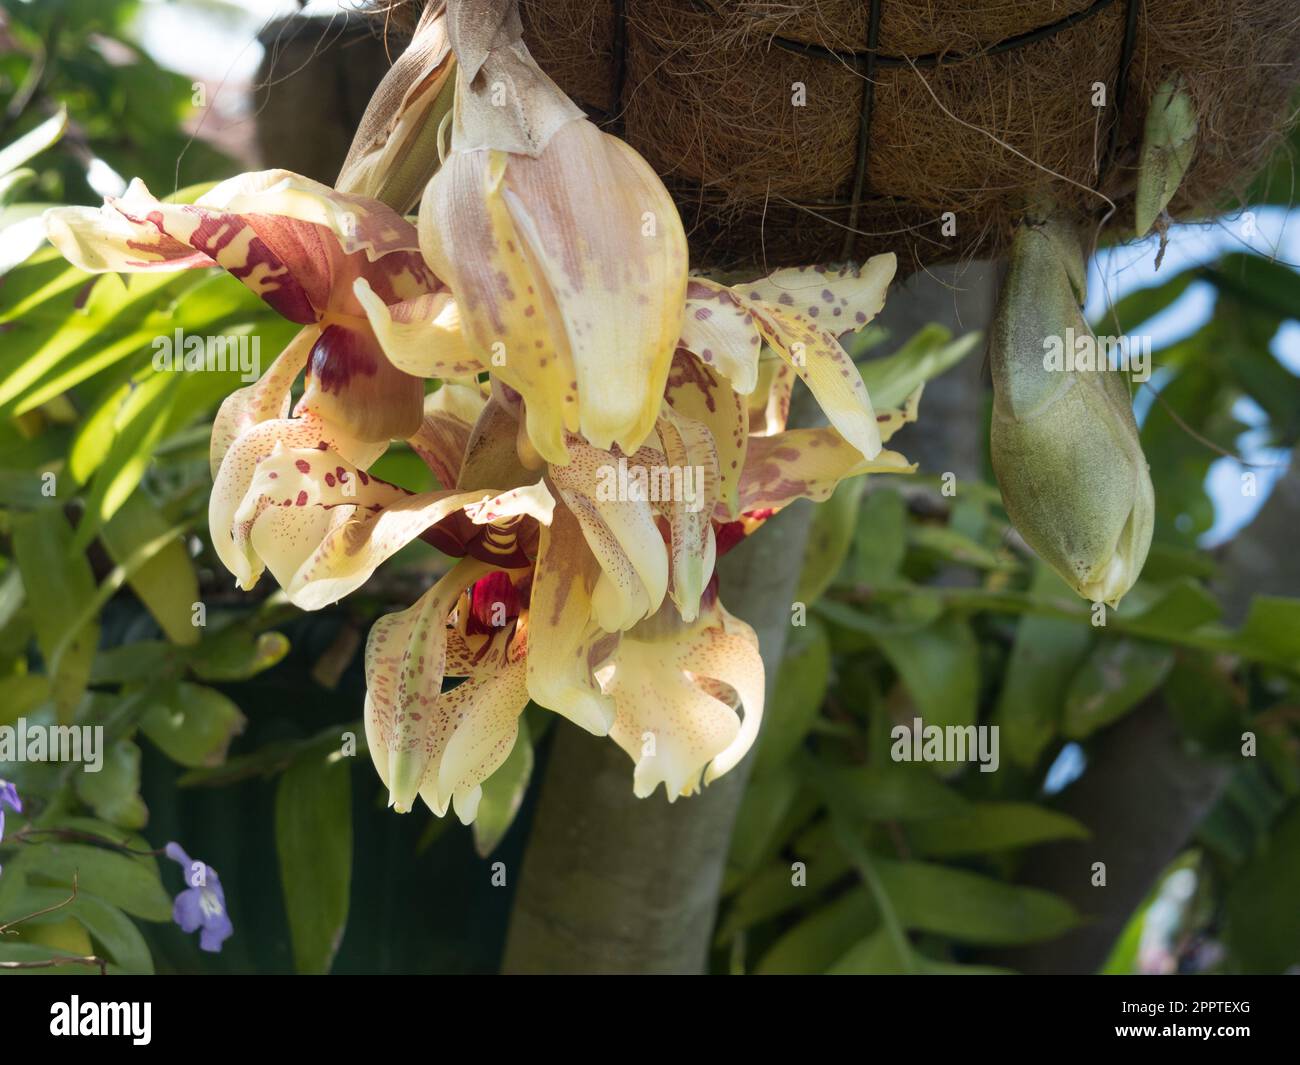 Upside-down Orchid flowers, Stanhopea orchids and buds hanging downwards from the bottom of the basket, close up Stock Photo